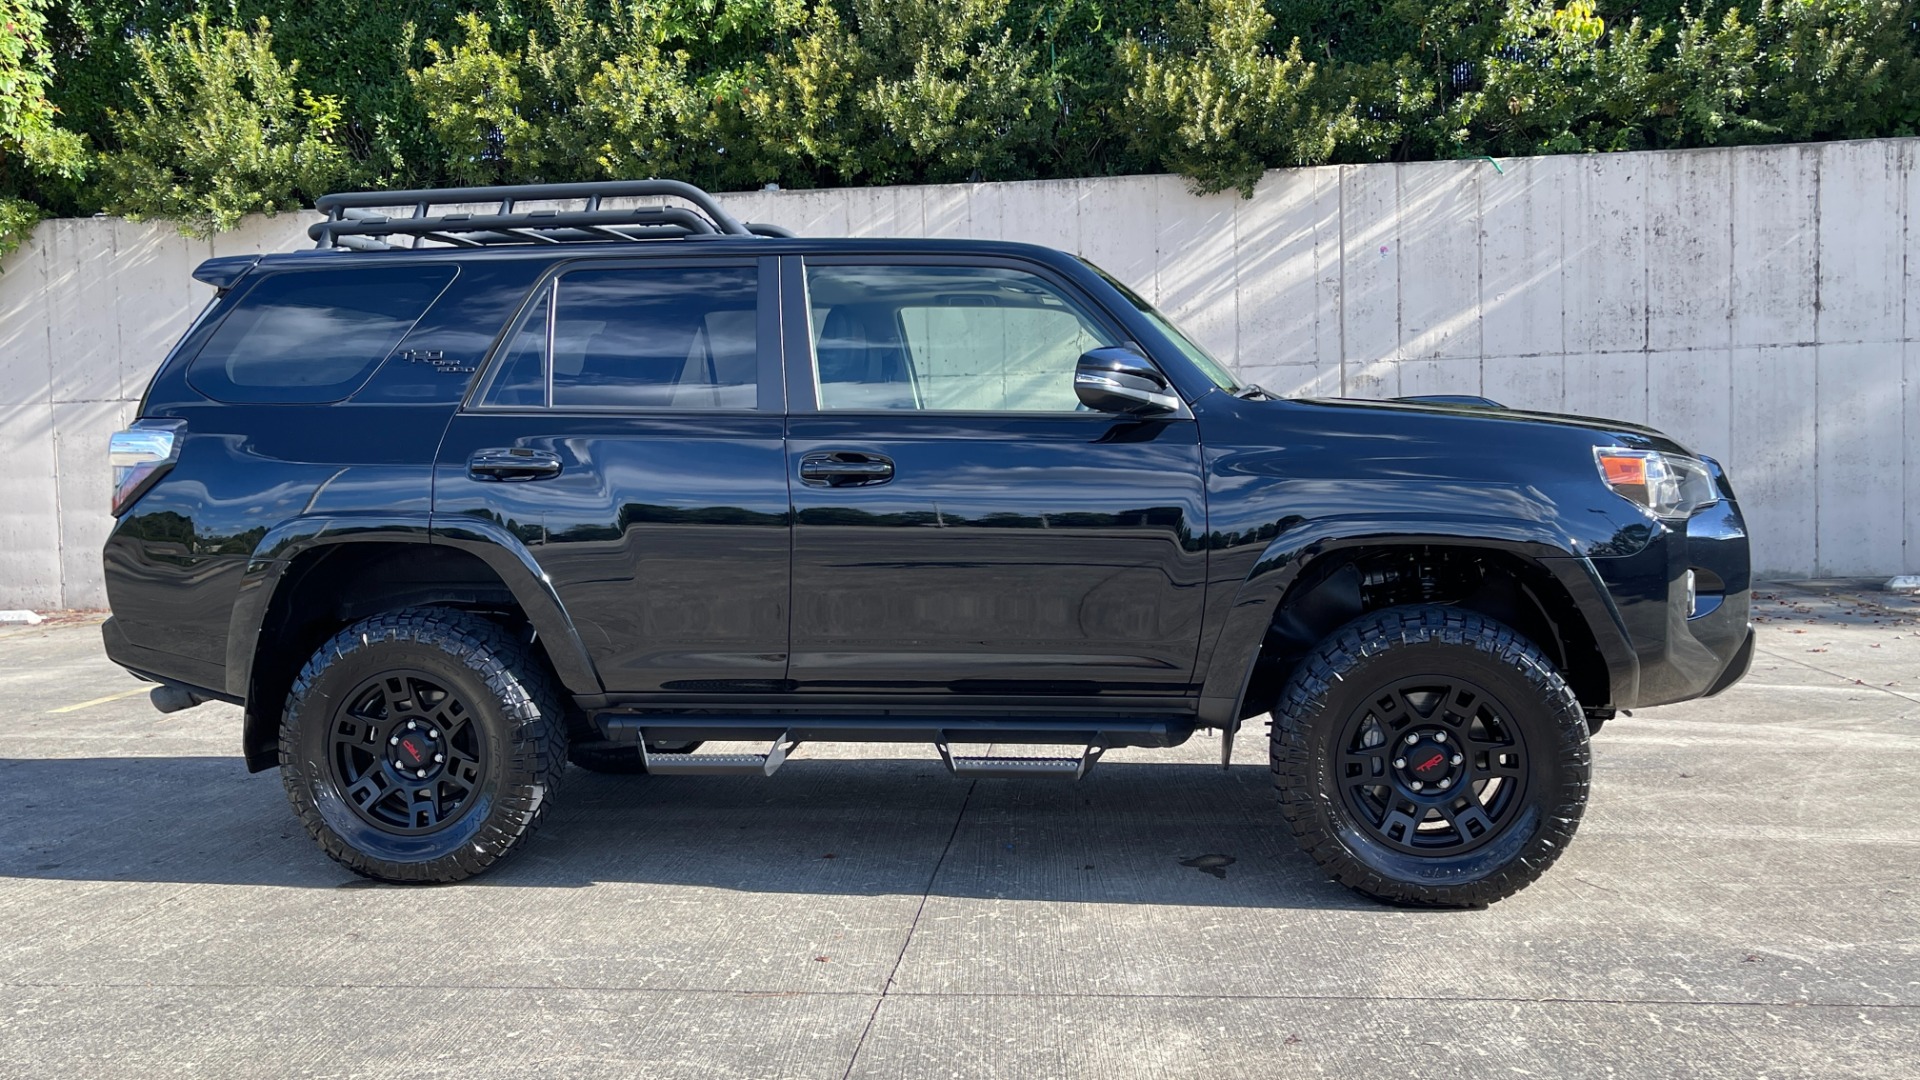 Used 2021 Toyota 4Runner TRD OFFROAD PREMIUM / KDSS SUSPENSION / XP SERIES / TRD PRO UPGRAGES / LIFT for sale $47,999 at Formula Imports in Charlotte NC 28227 3